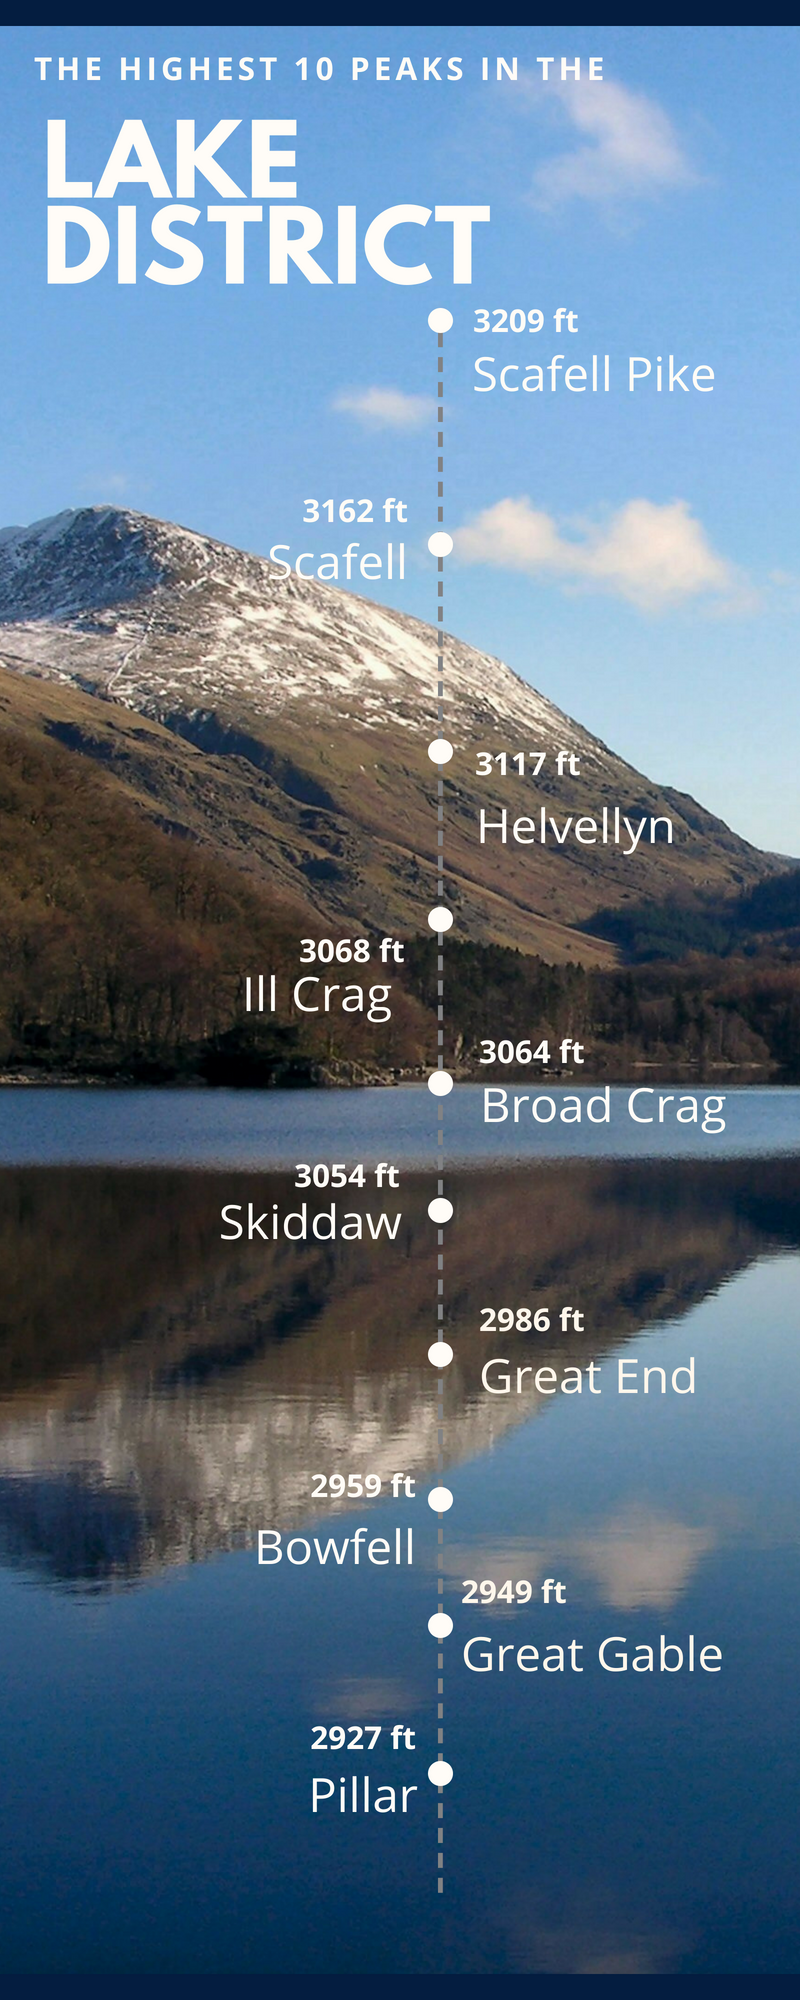 The highest peak in the lake district - graph